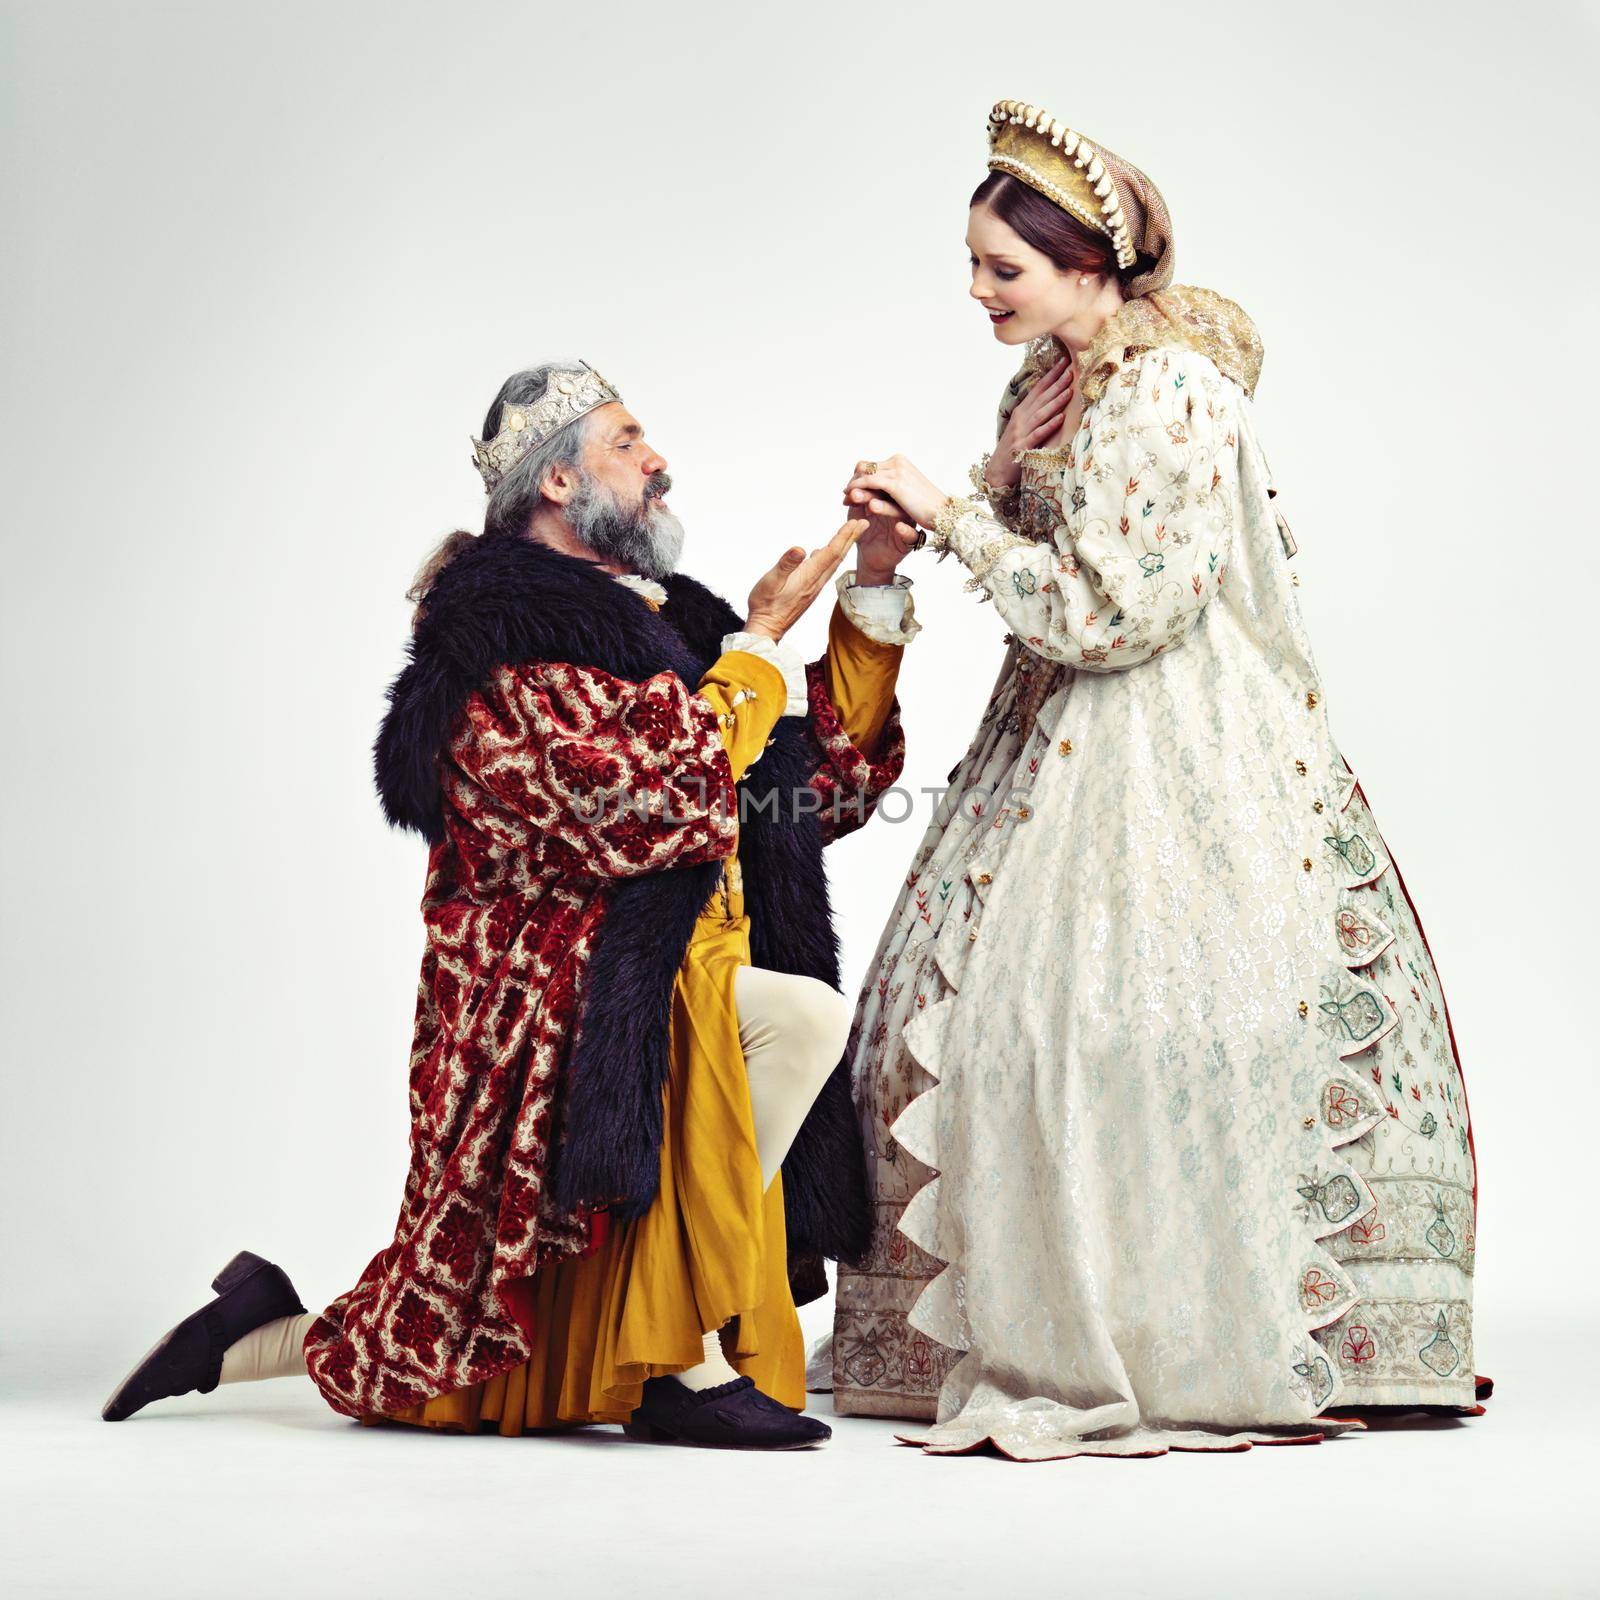 Studio shot of a king proposing to a royal lady